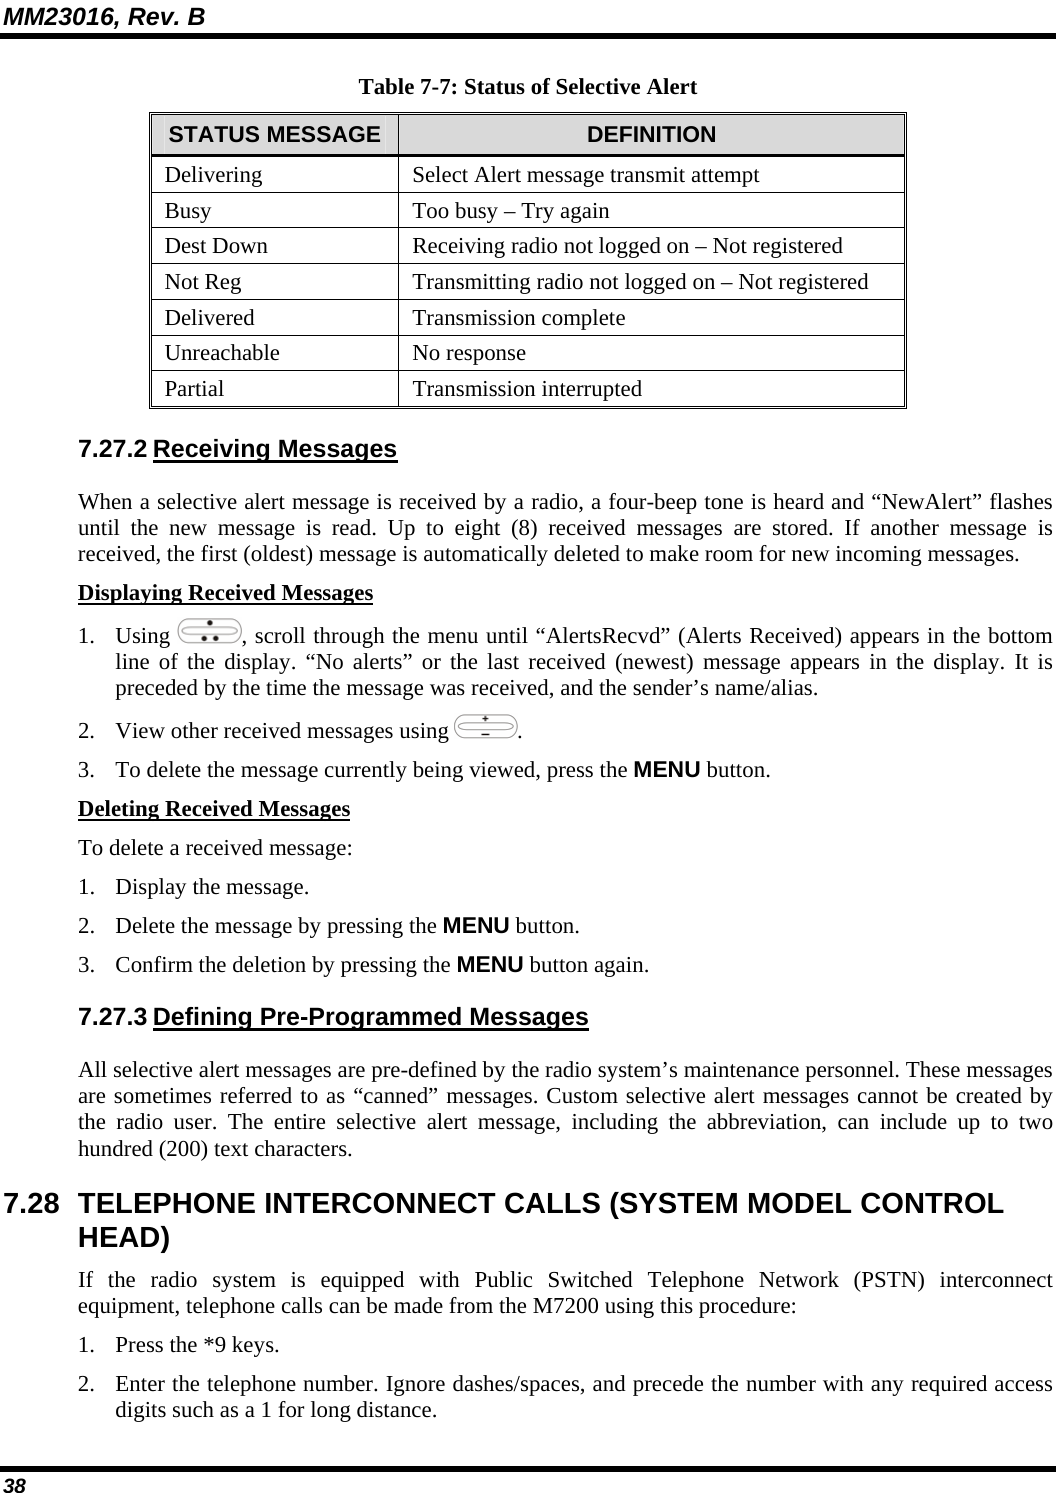 MM23016, Rev. B 38 Table 7-7: Status of Selective Alert STATUS MESSAGE  DEFINITION Delivering  Select Alert message transmit attempt Busy  Too busy – Try again Dest Down  Receiving radio not logged on – Not registered Not Reg  Transmitting radio not logged on – Not registered Delivered Transmission complete Unreachable No response Partial Transmission interrupted 7.27.2 Receiving Messages When a selective alert message is received by a radio, a four-beep tone is heard and “NewAlert” flashes until the new message is read. Up to eight (8) received messages are stored. If another message is received, the first (oldest) message is automatically deleted to make room for new incoming messages. Displaying Received Messages 1. Using  , scroll through the menu until “AlertsRecvd” (Alerts Received) appears in the bottom line of the display. “No alerts” or the last received (newest) message appears in the display. It is preceded by the time the message was received, and the sender’s name/alias. 2. View other received messages using  . 3. To delete the message currently being viewed, press the MENU button. Deleting Received Messages To delete a received message: 1. Display the message. 2. Delete the message by pressing the MENU button. 3. Confirm the deletion by pressing the MENU button again. 7.27.3 Defining Pre-Programmed Messages All selective alert messages are pre-defined by the radio system’s maintenance personnel. These messages are sometimes referred to as “canned” messages. Custom selective alert messages cannot be created by the radio user. The entire selective alert message, including the abbreviation, can include up to two hundred (200) text characters. 7.28 TELEPHONE INTERCONNECT CALLS (SYSTEM MODEL CONTROL HEAD) If the radio system is equipped with Public Switched Telephone Network (PSTN) interconnect equipment, telephone calls can be made from the M7200 using this procedure: 1. Press the *9 keys. 2. Enter the telephone number. Ignore dashes/spaces, and precede the number with any required access digits such as a 1 for long distance. 